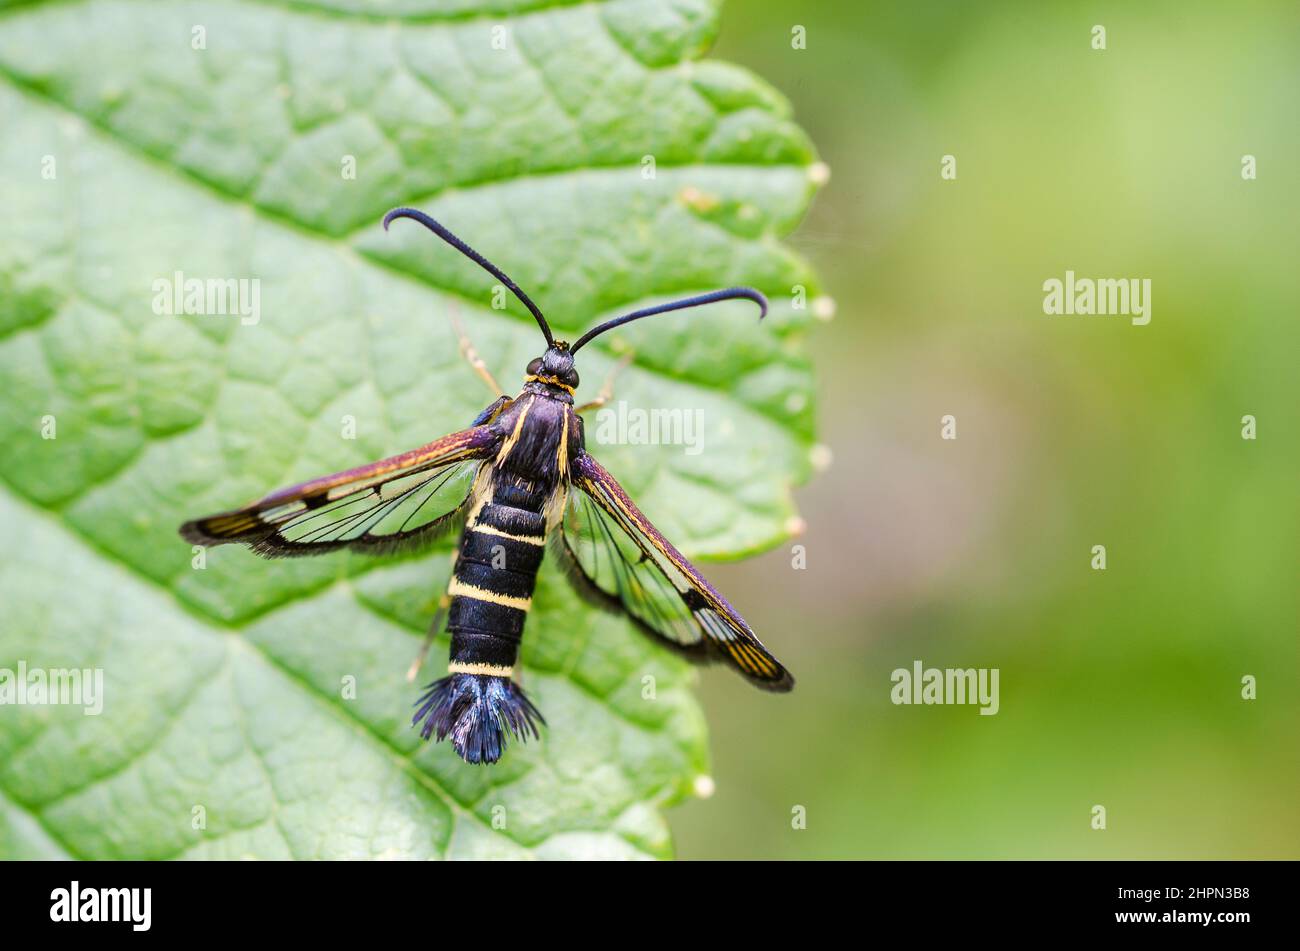 Synanthedon tipuliformis, known as the currant clearwing, is a moth of the family Sesiidae, on host plant, blackcurrant (Ribes nigrum). Stock Photo